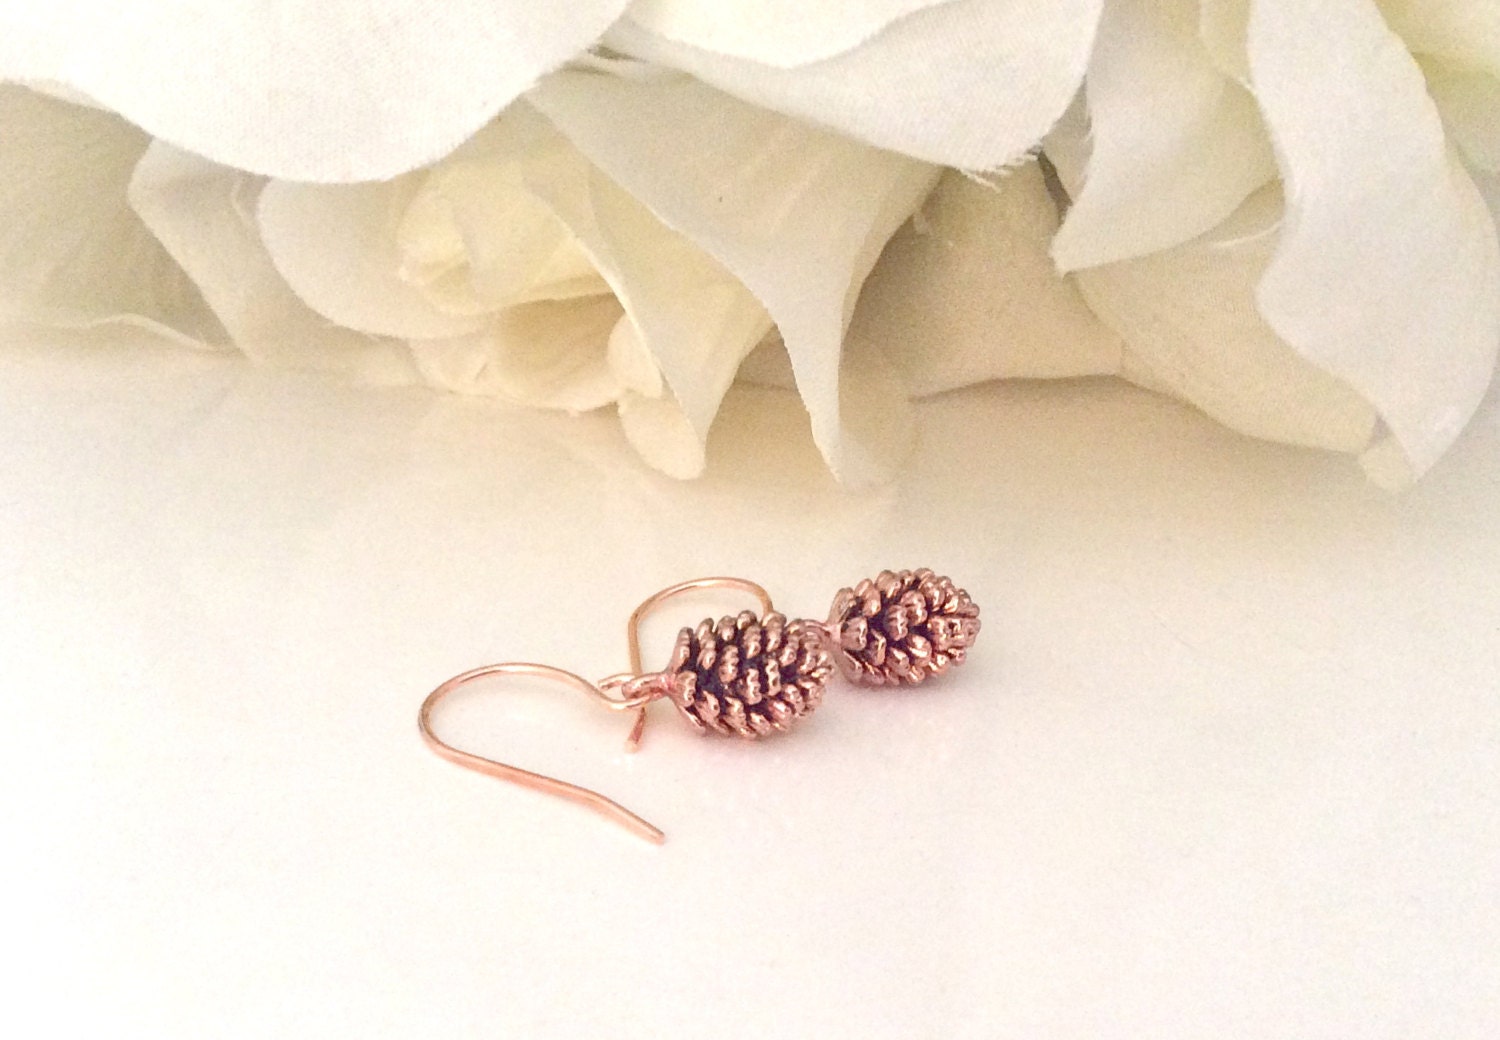 Rose Gold Earrings, pine cone earrings, Tiny Jewelry, dainty gold earrings, gifts for her, best friend gifts, minimalist, best selling item